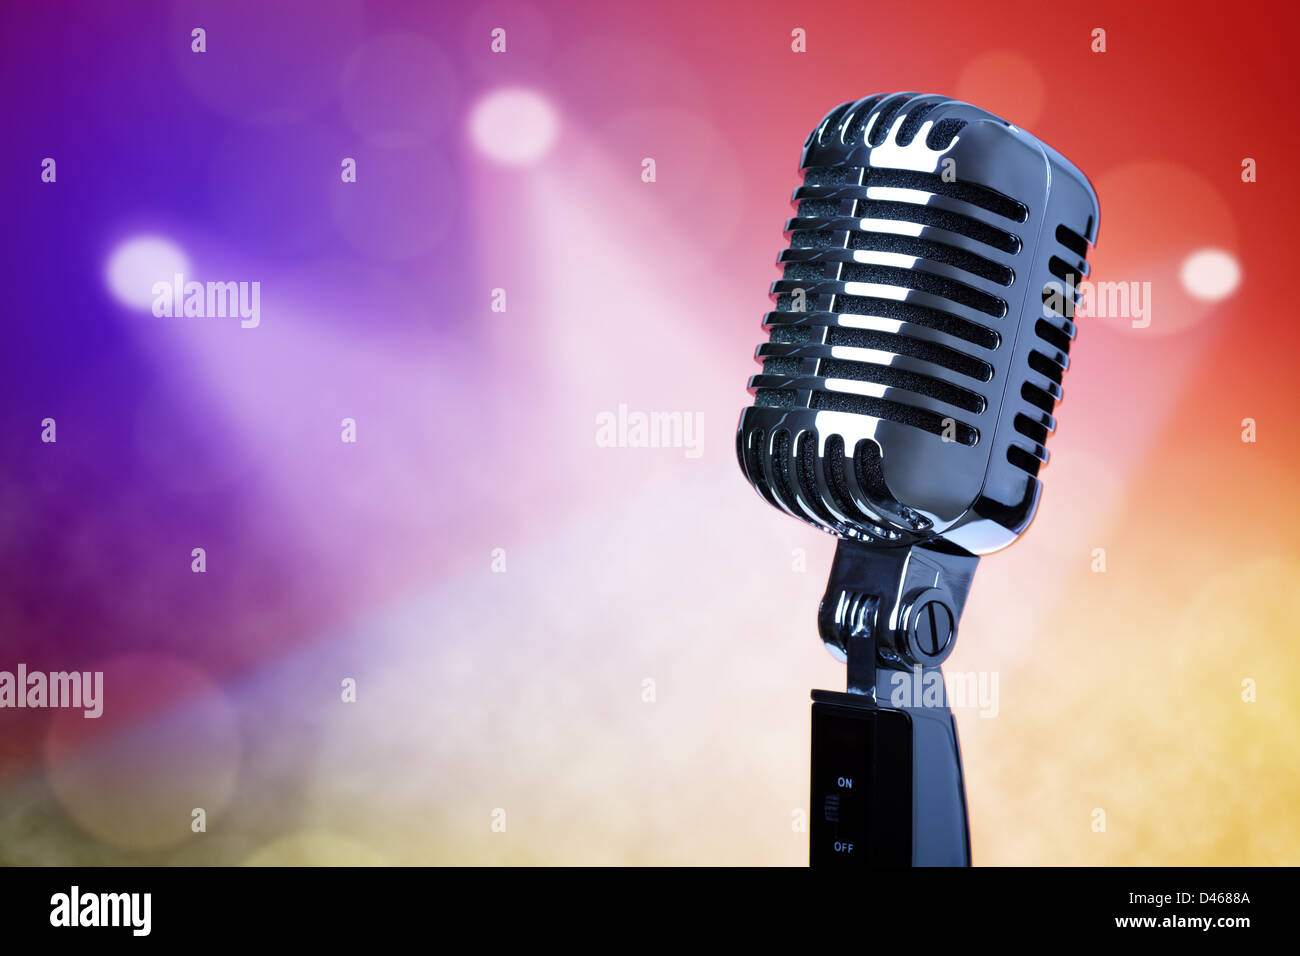 Vintage microphone on stage Stock Photo